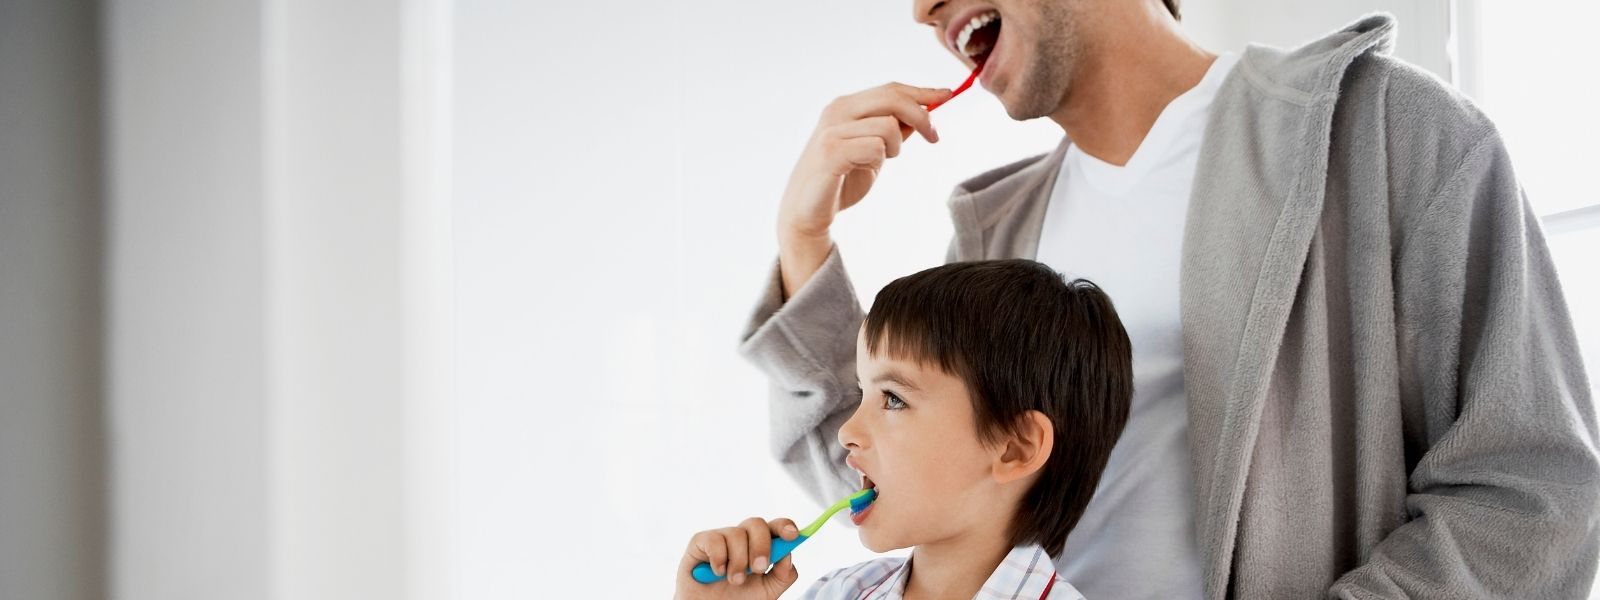 Father and son brushing teeth